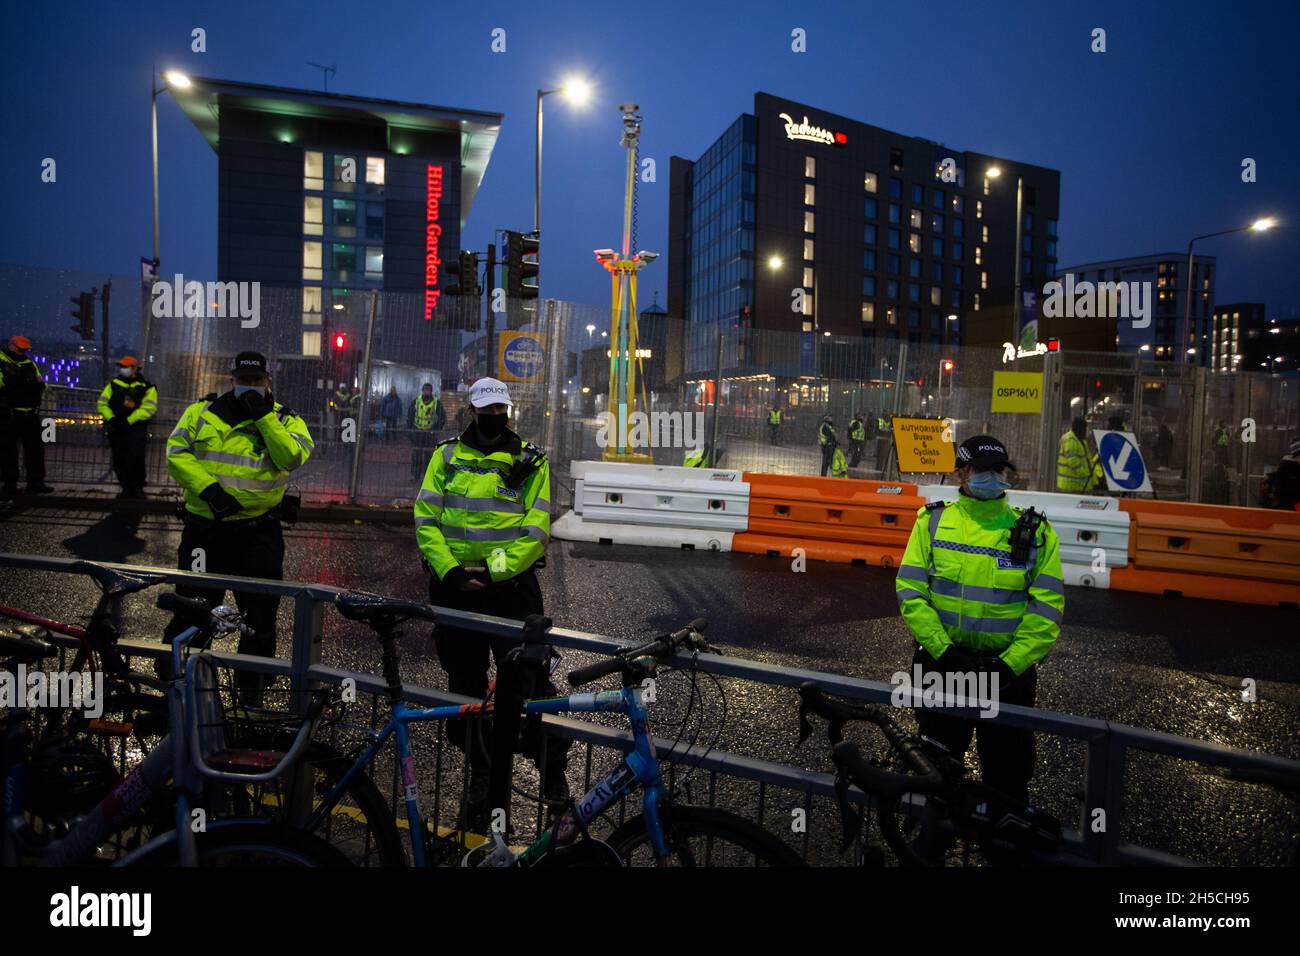 Glasgow, Scotland, UK. Police man the security fences outside the 26th United Nations Climate Change Conference, known as COP26, in Glasgow, Scotland, UK, on 8 November 2021. Photo:Jeremy Sutton-Hibbert/Alamy Live News. Stock Photo